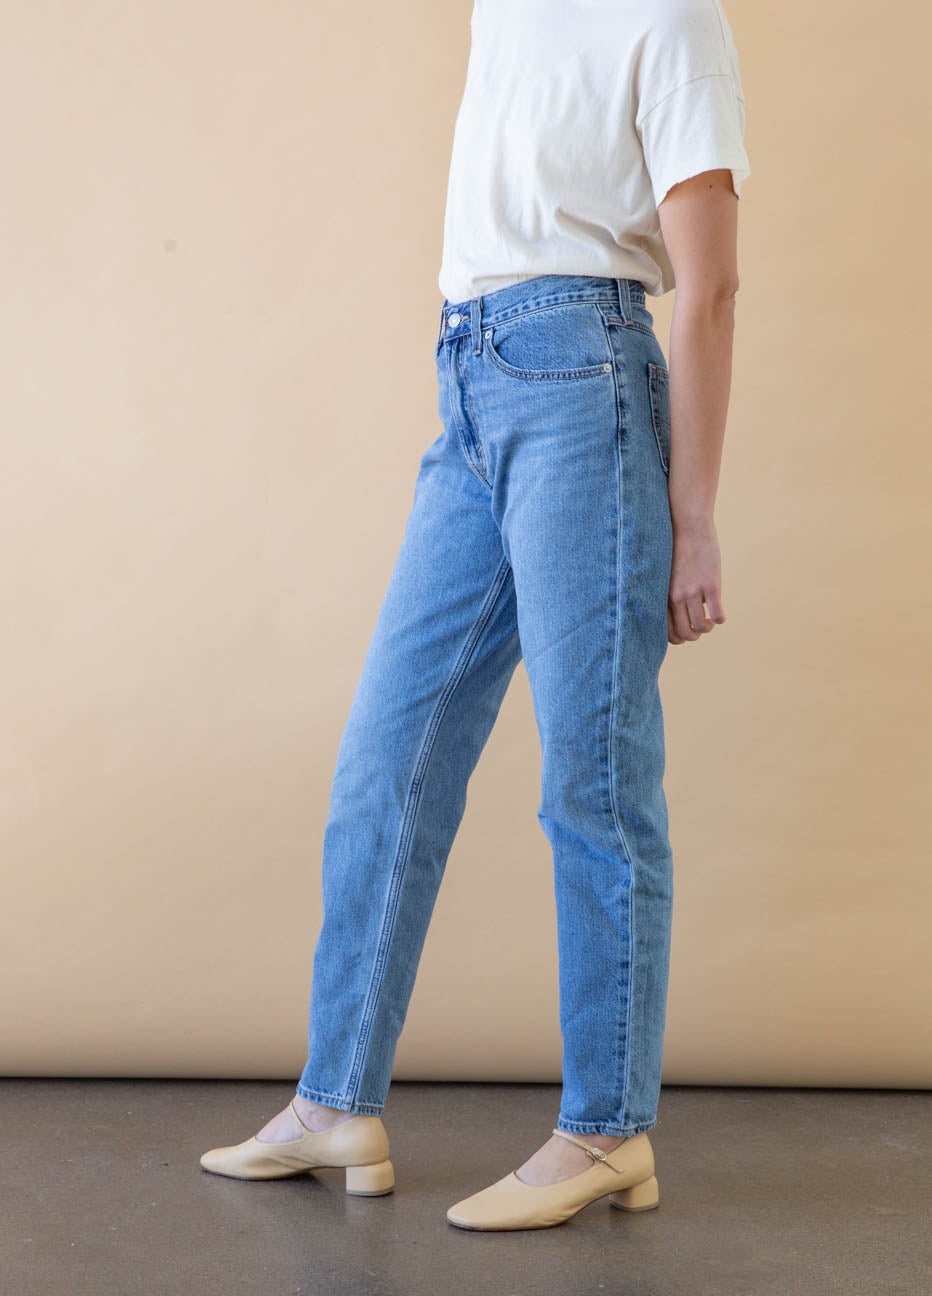 80s “Mom” jeans